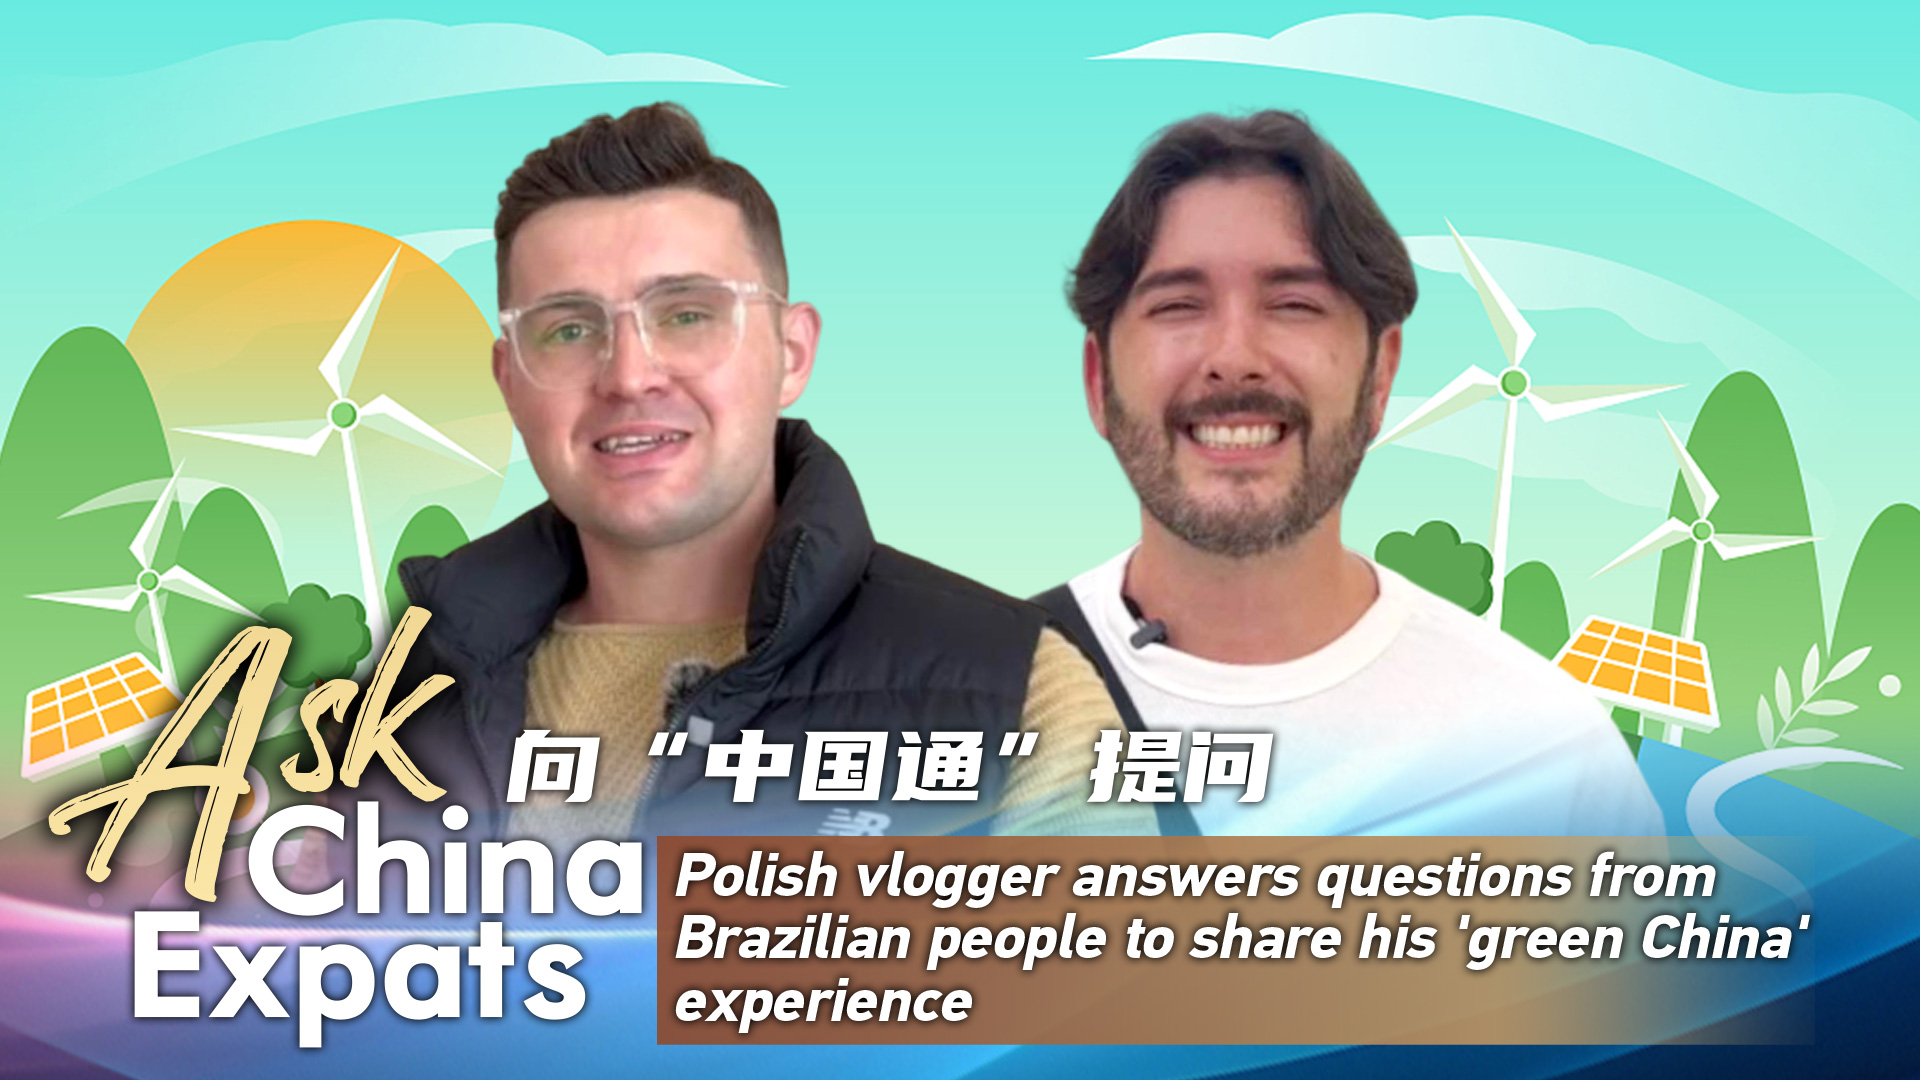 Polish vlogger discusses his 'green China' experience